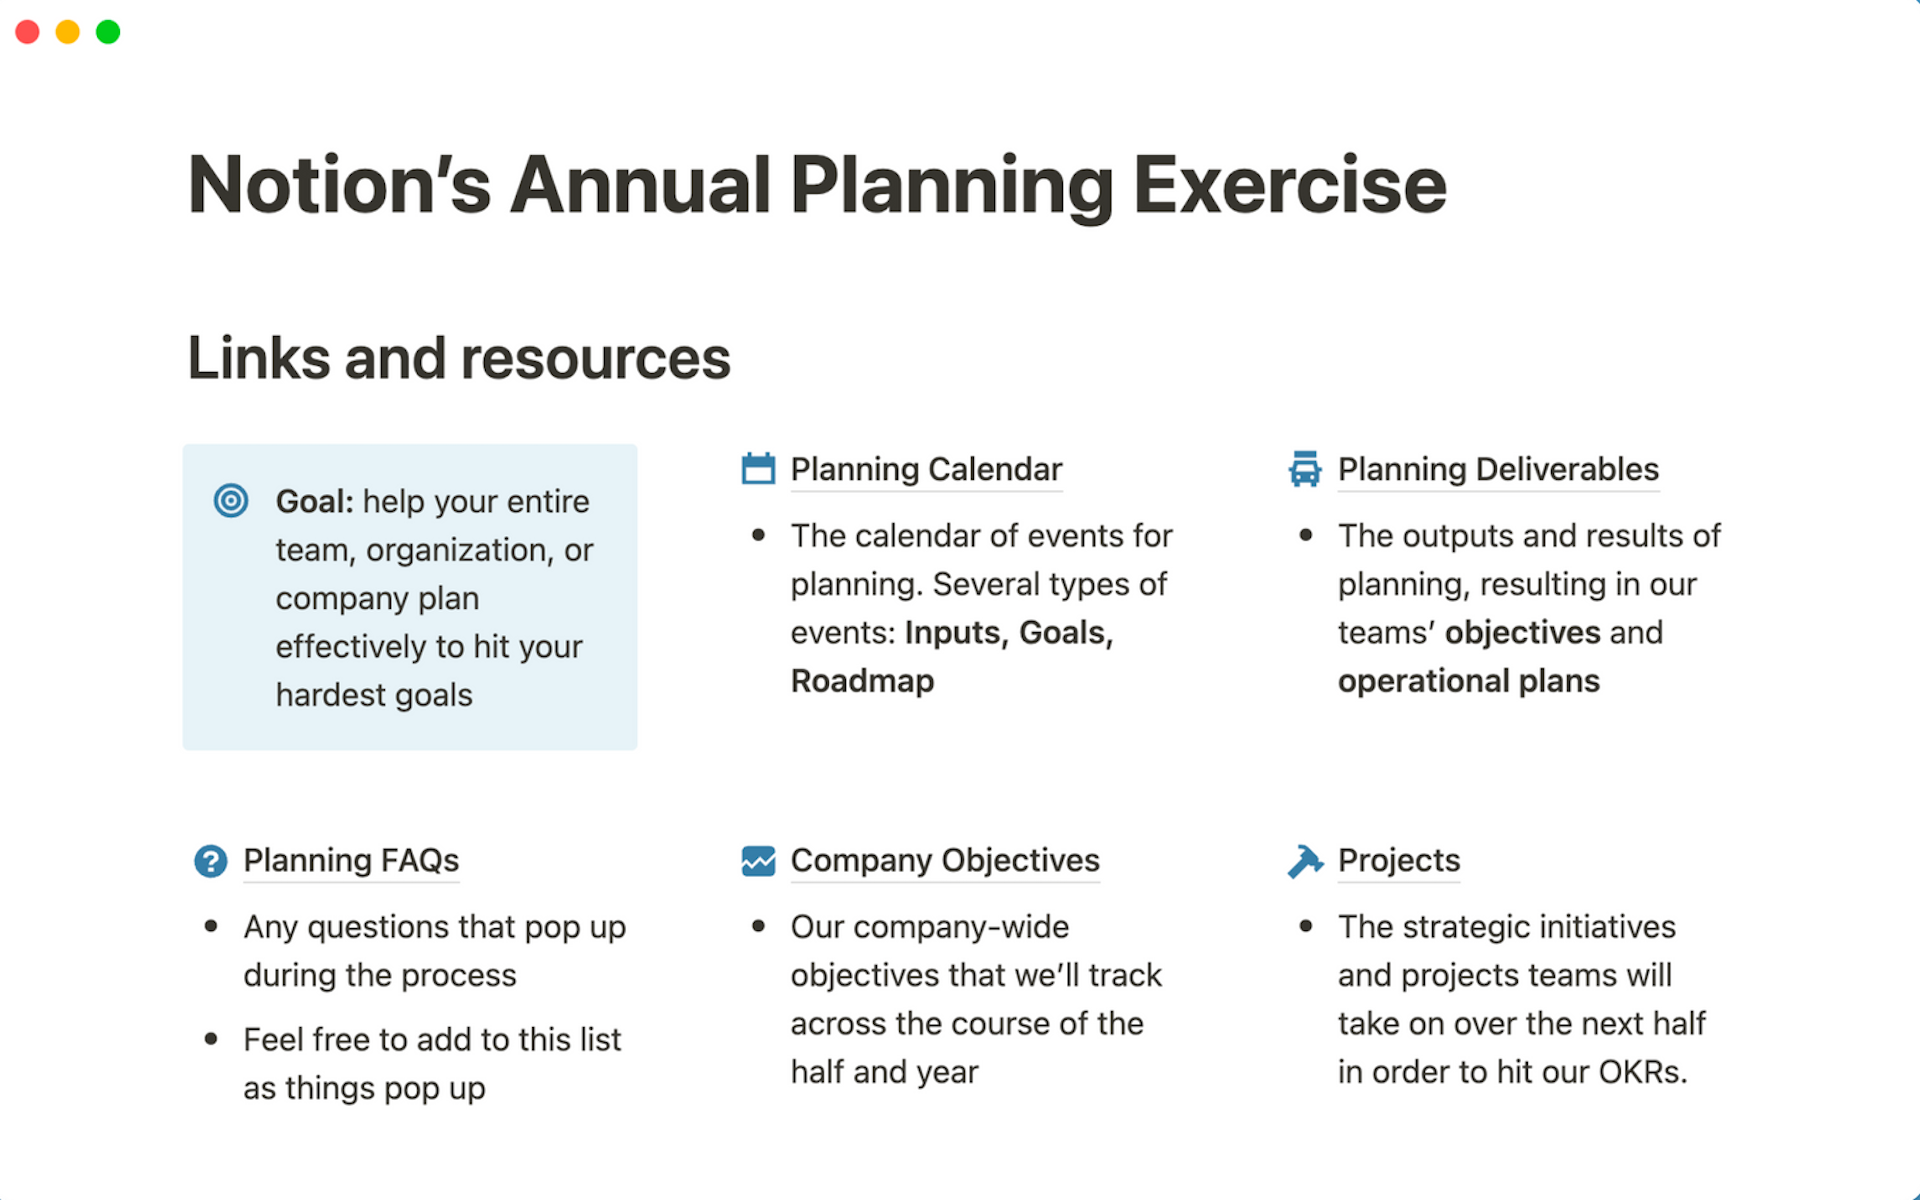 Annual planning can be a huge pain point for companies, especially those that are scaling. Notion can help keep all your stakeholders aligned.